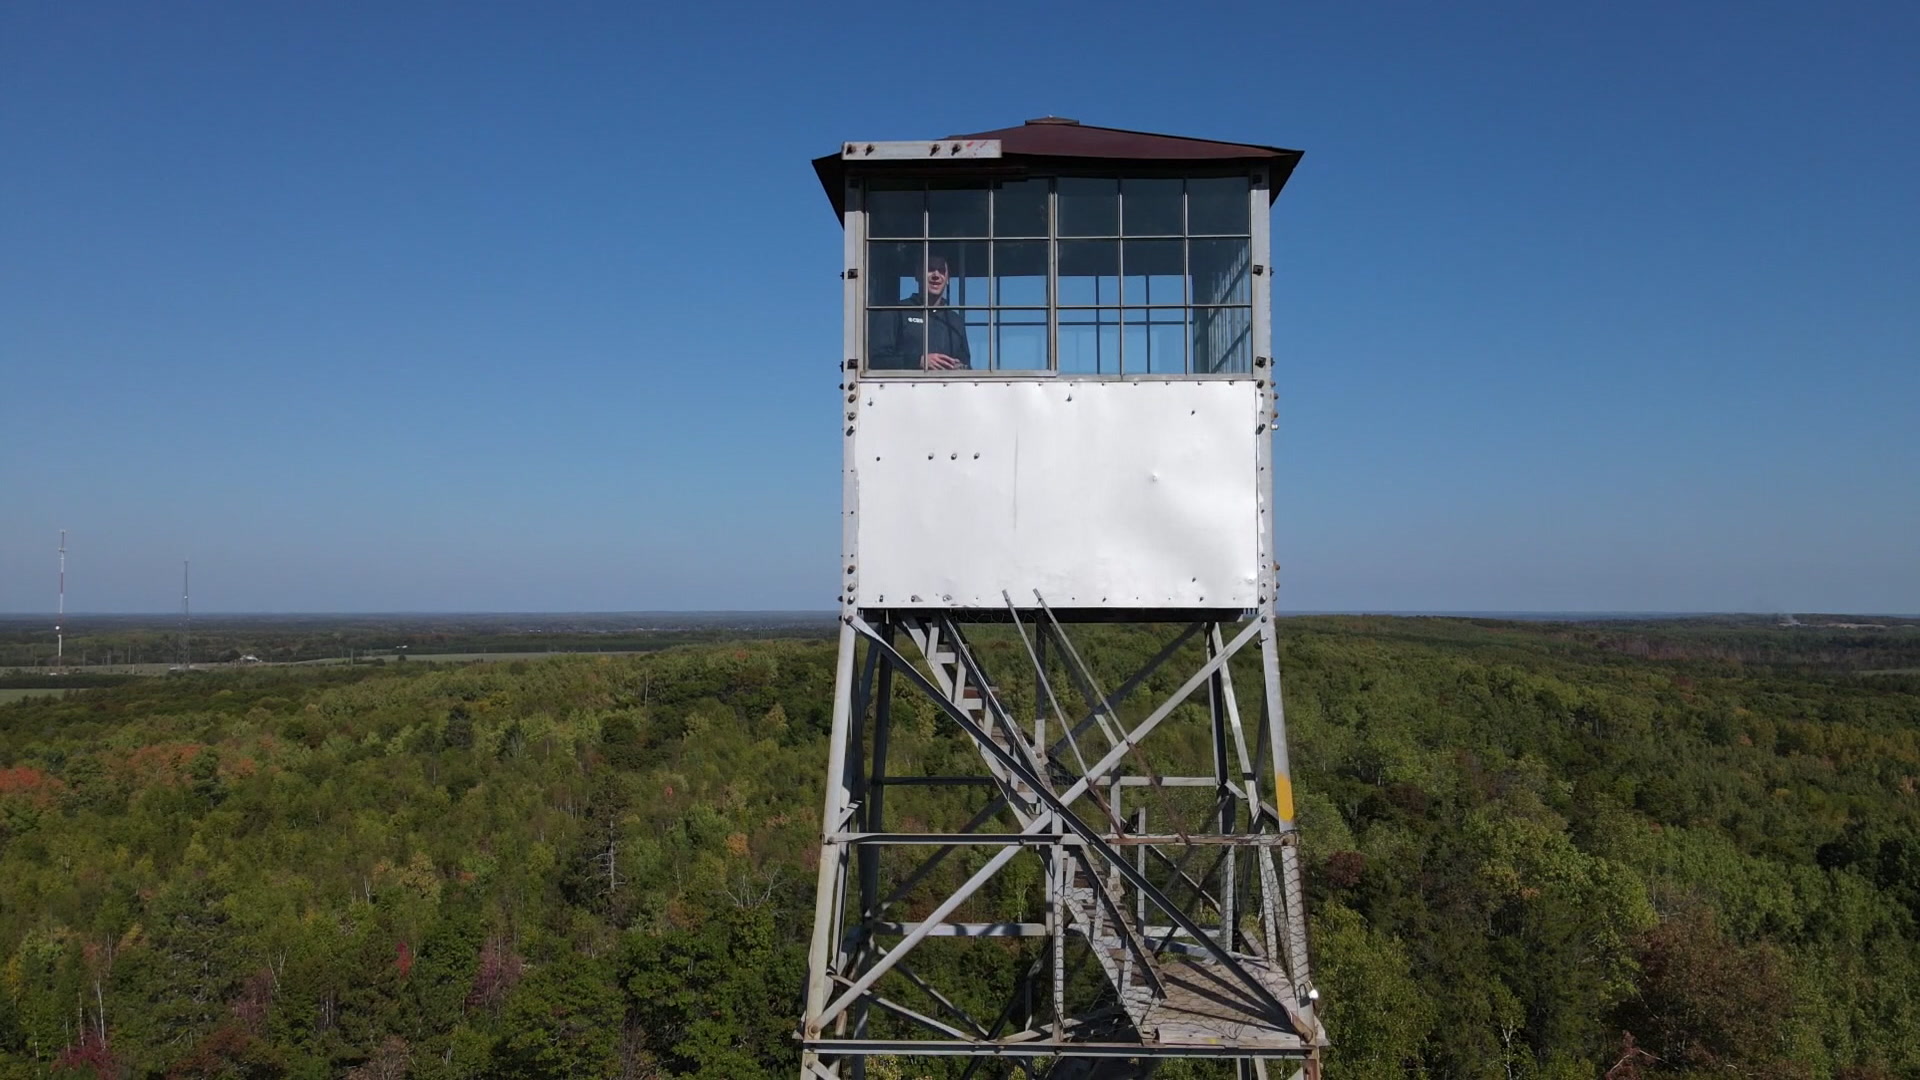 ‘Absolutely Gorgeous’: 100-Year-Old Fire Tower Offers Tree-Top Views In Northern Minnesota